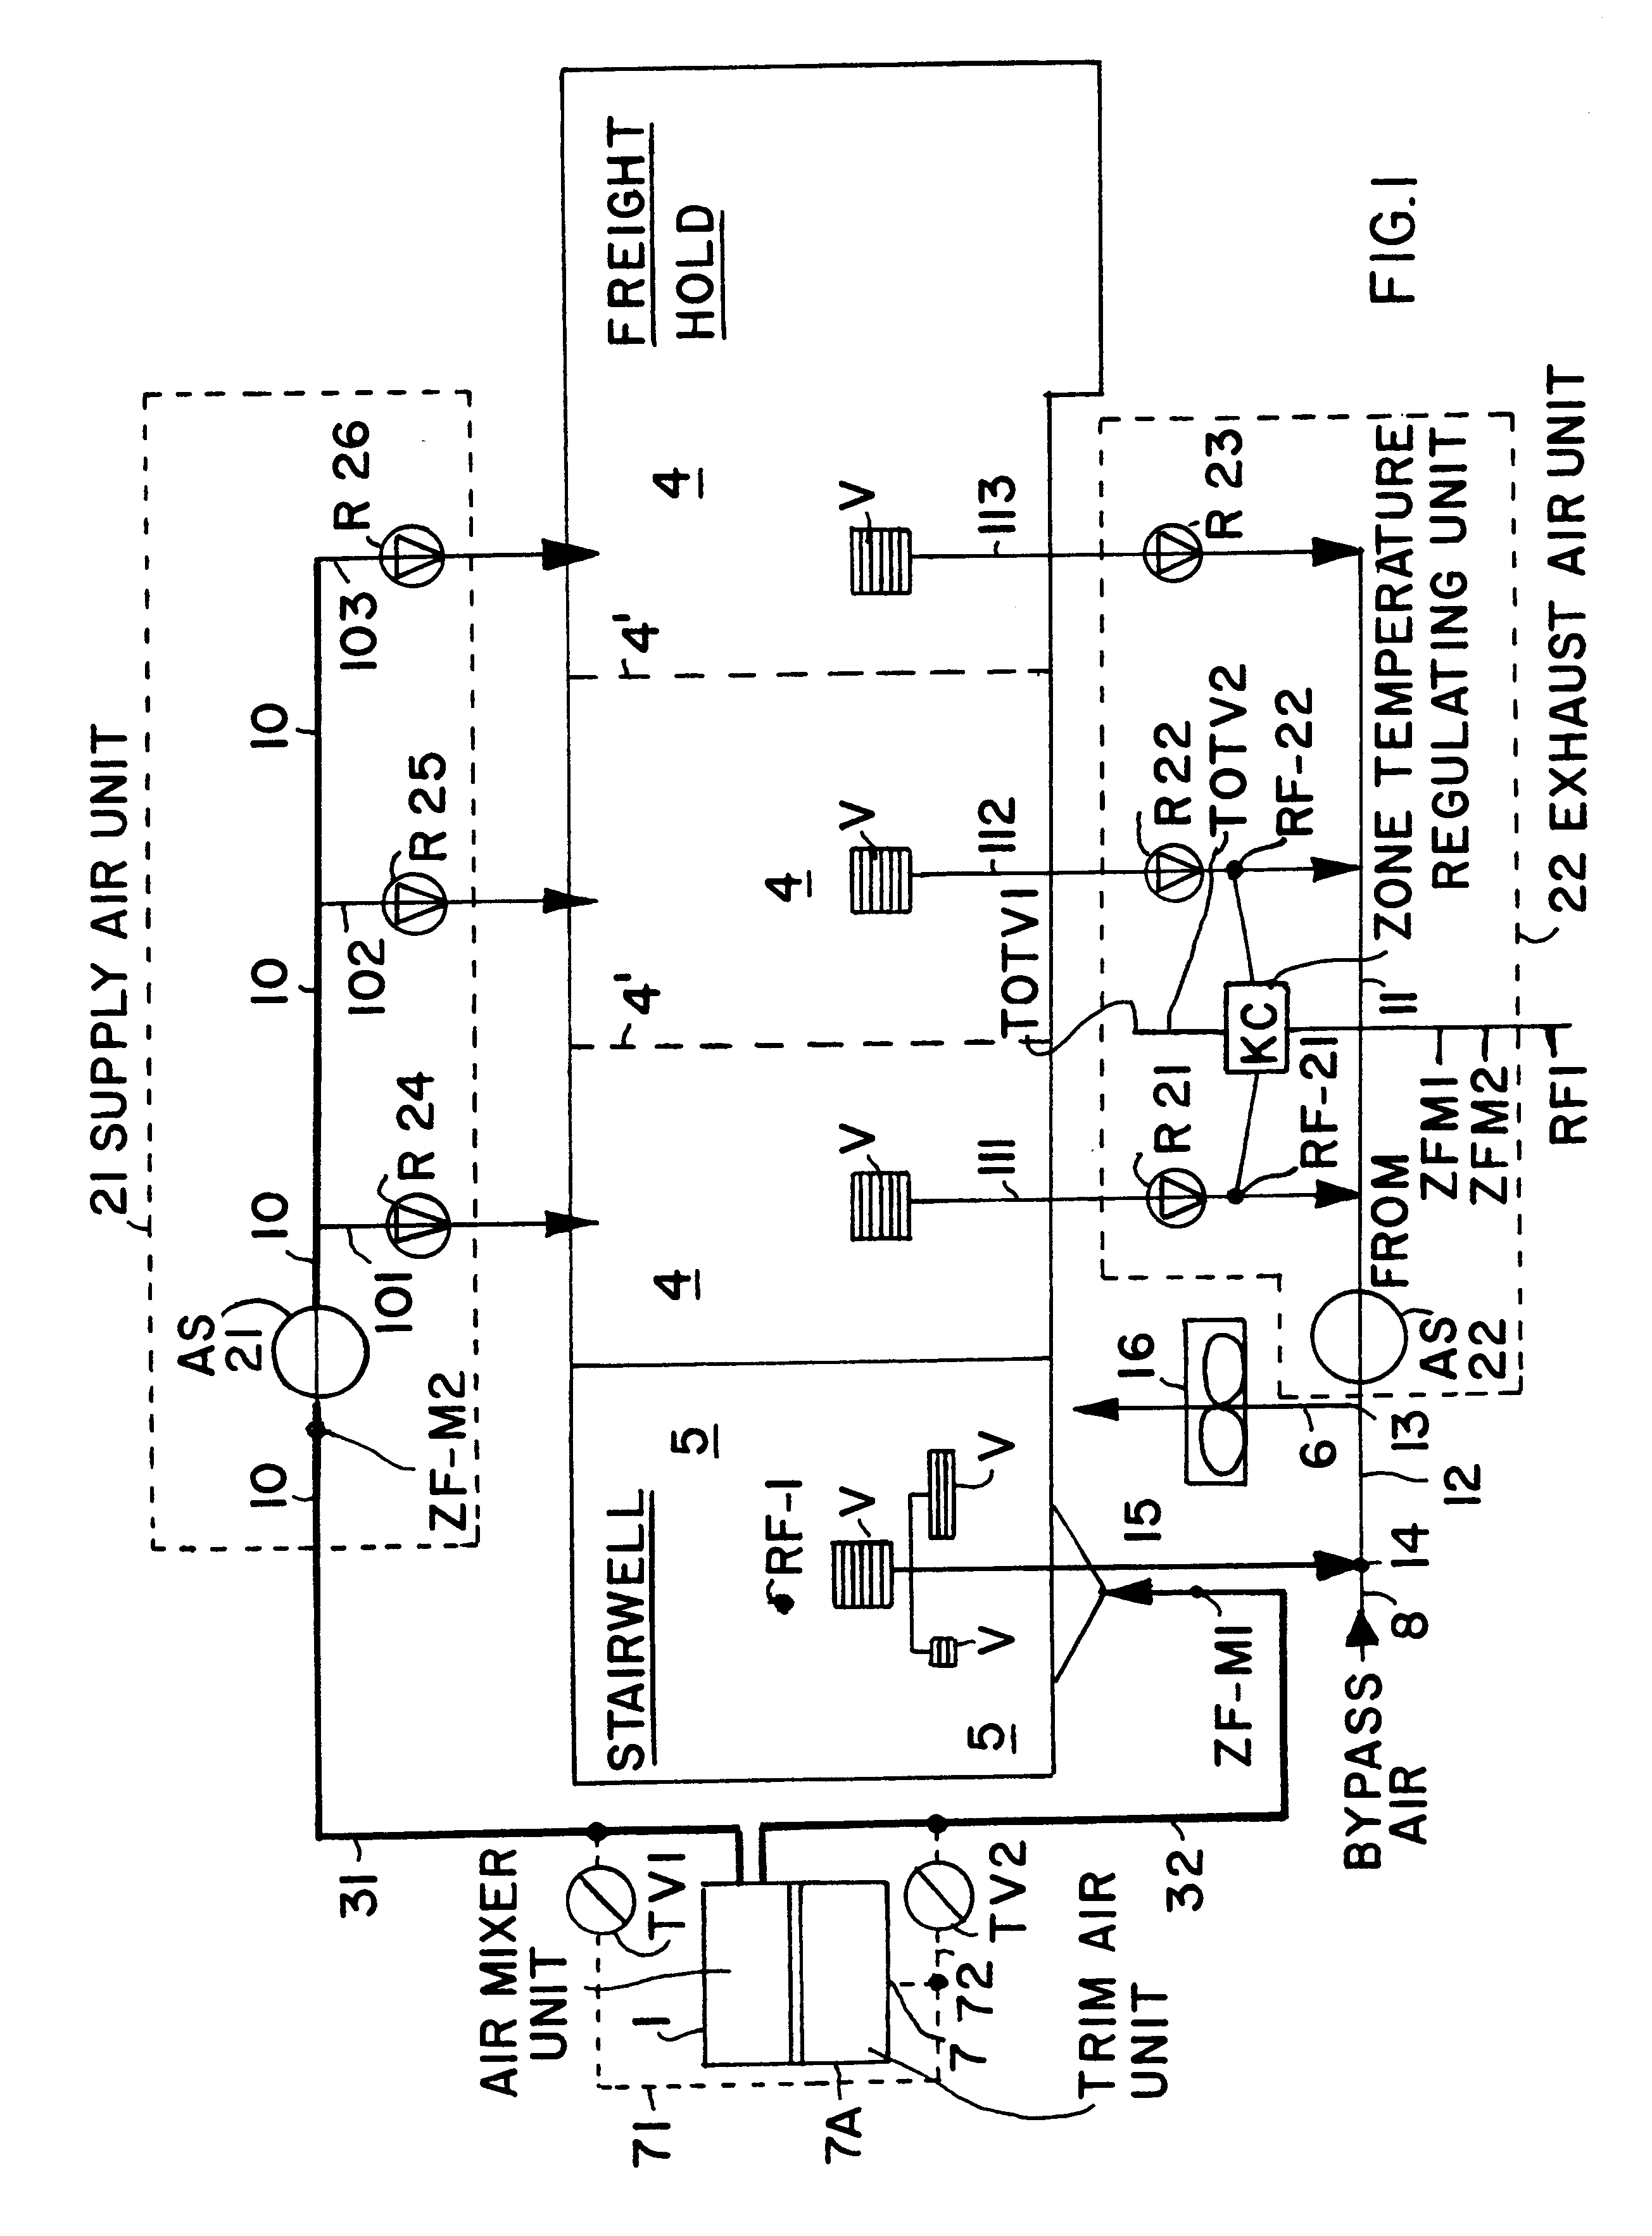 Air-conditioning system for below-deck areas of a passenger aircraft